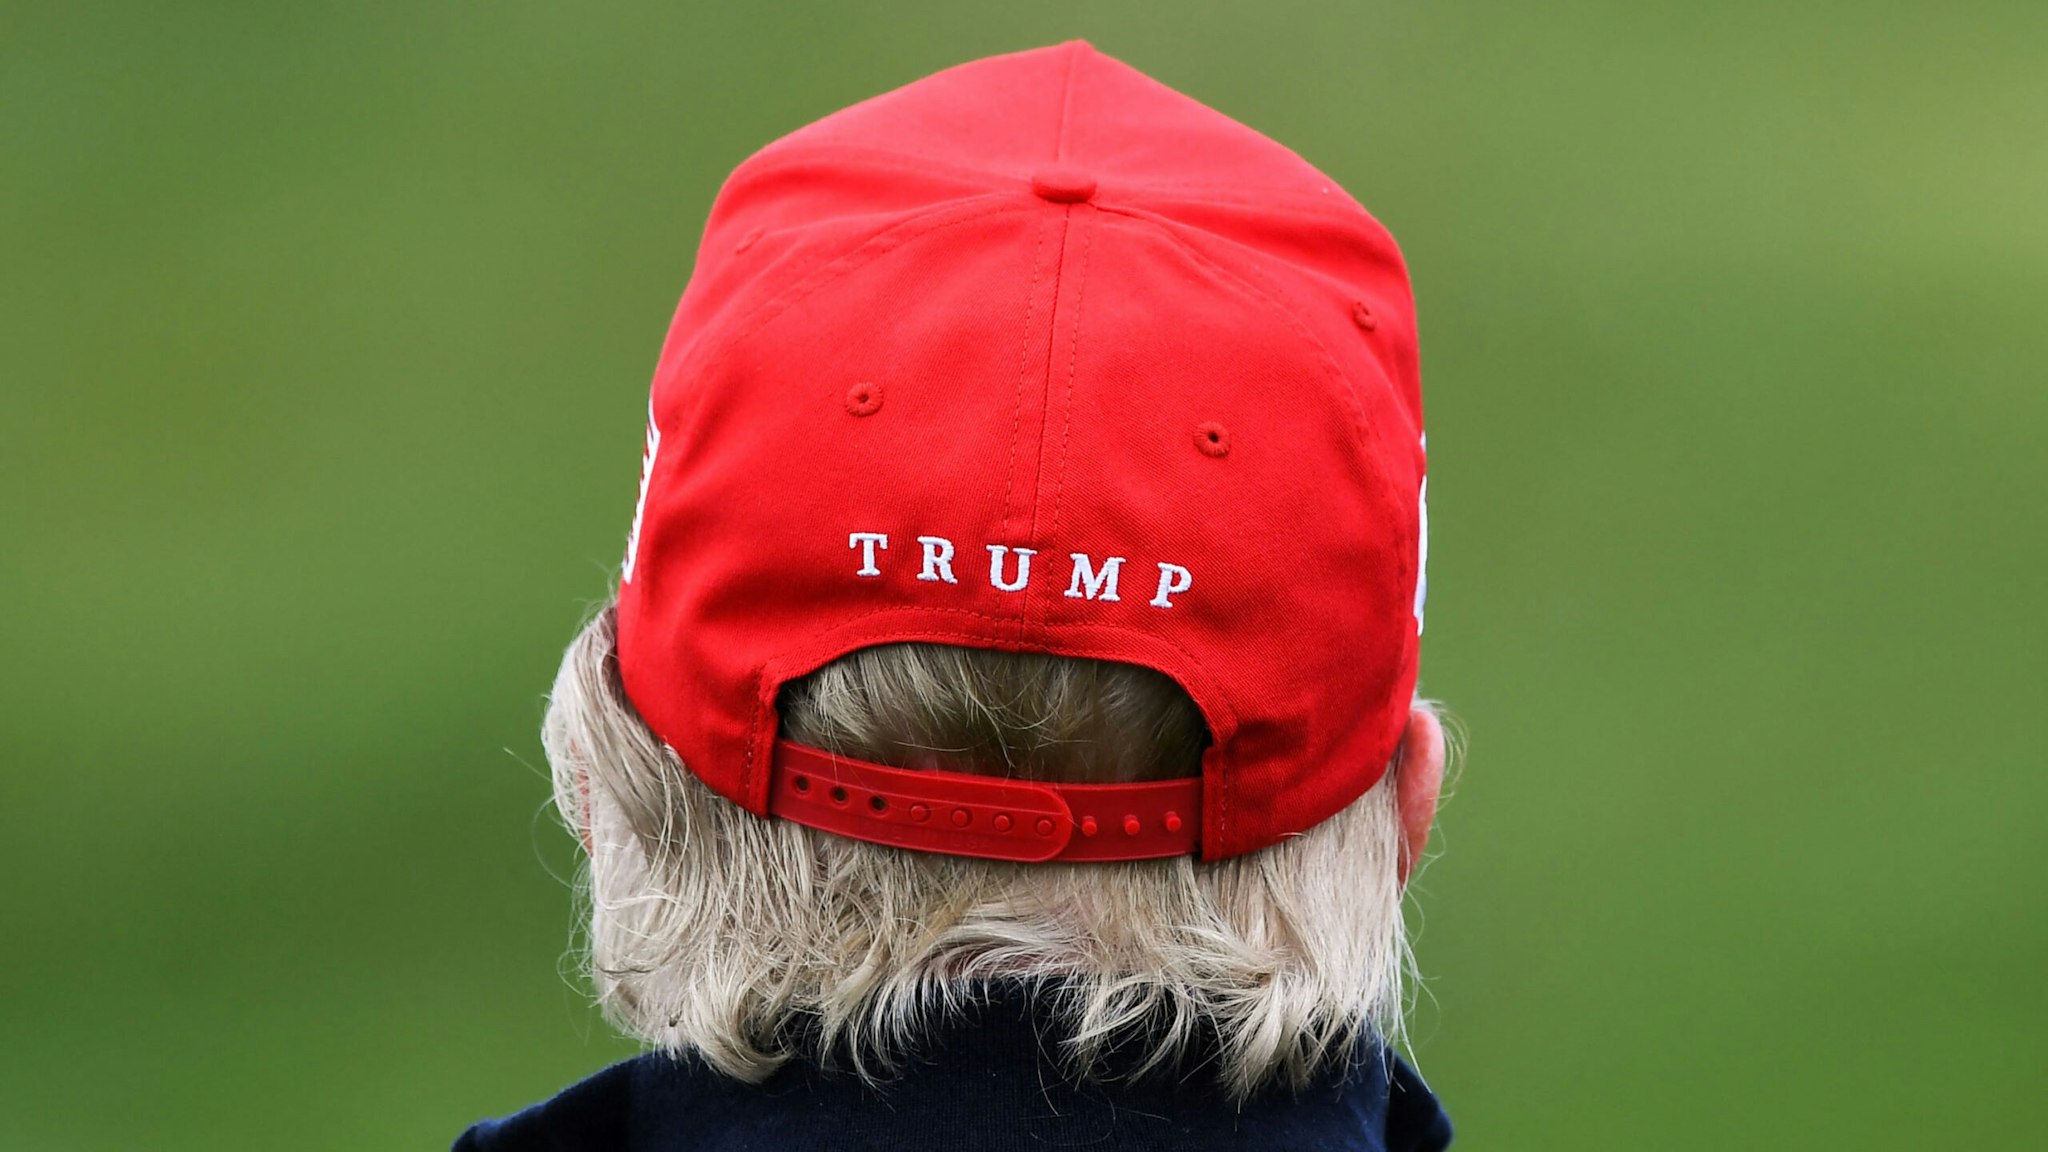 TOPSHOT - The cap of former US President Donald Trump is pictured as he plays golf at the Trump Turnberry Golf Courses, in Turnberry on the west coast of Scotland on May 2, 2023, during the second day of his first visit to the country since losing the Presidency.